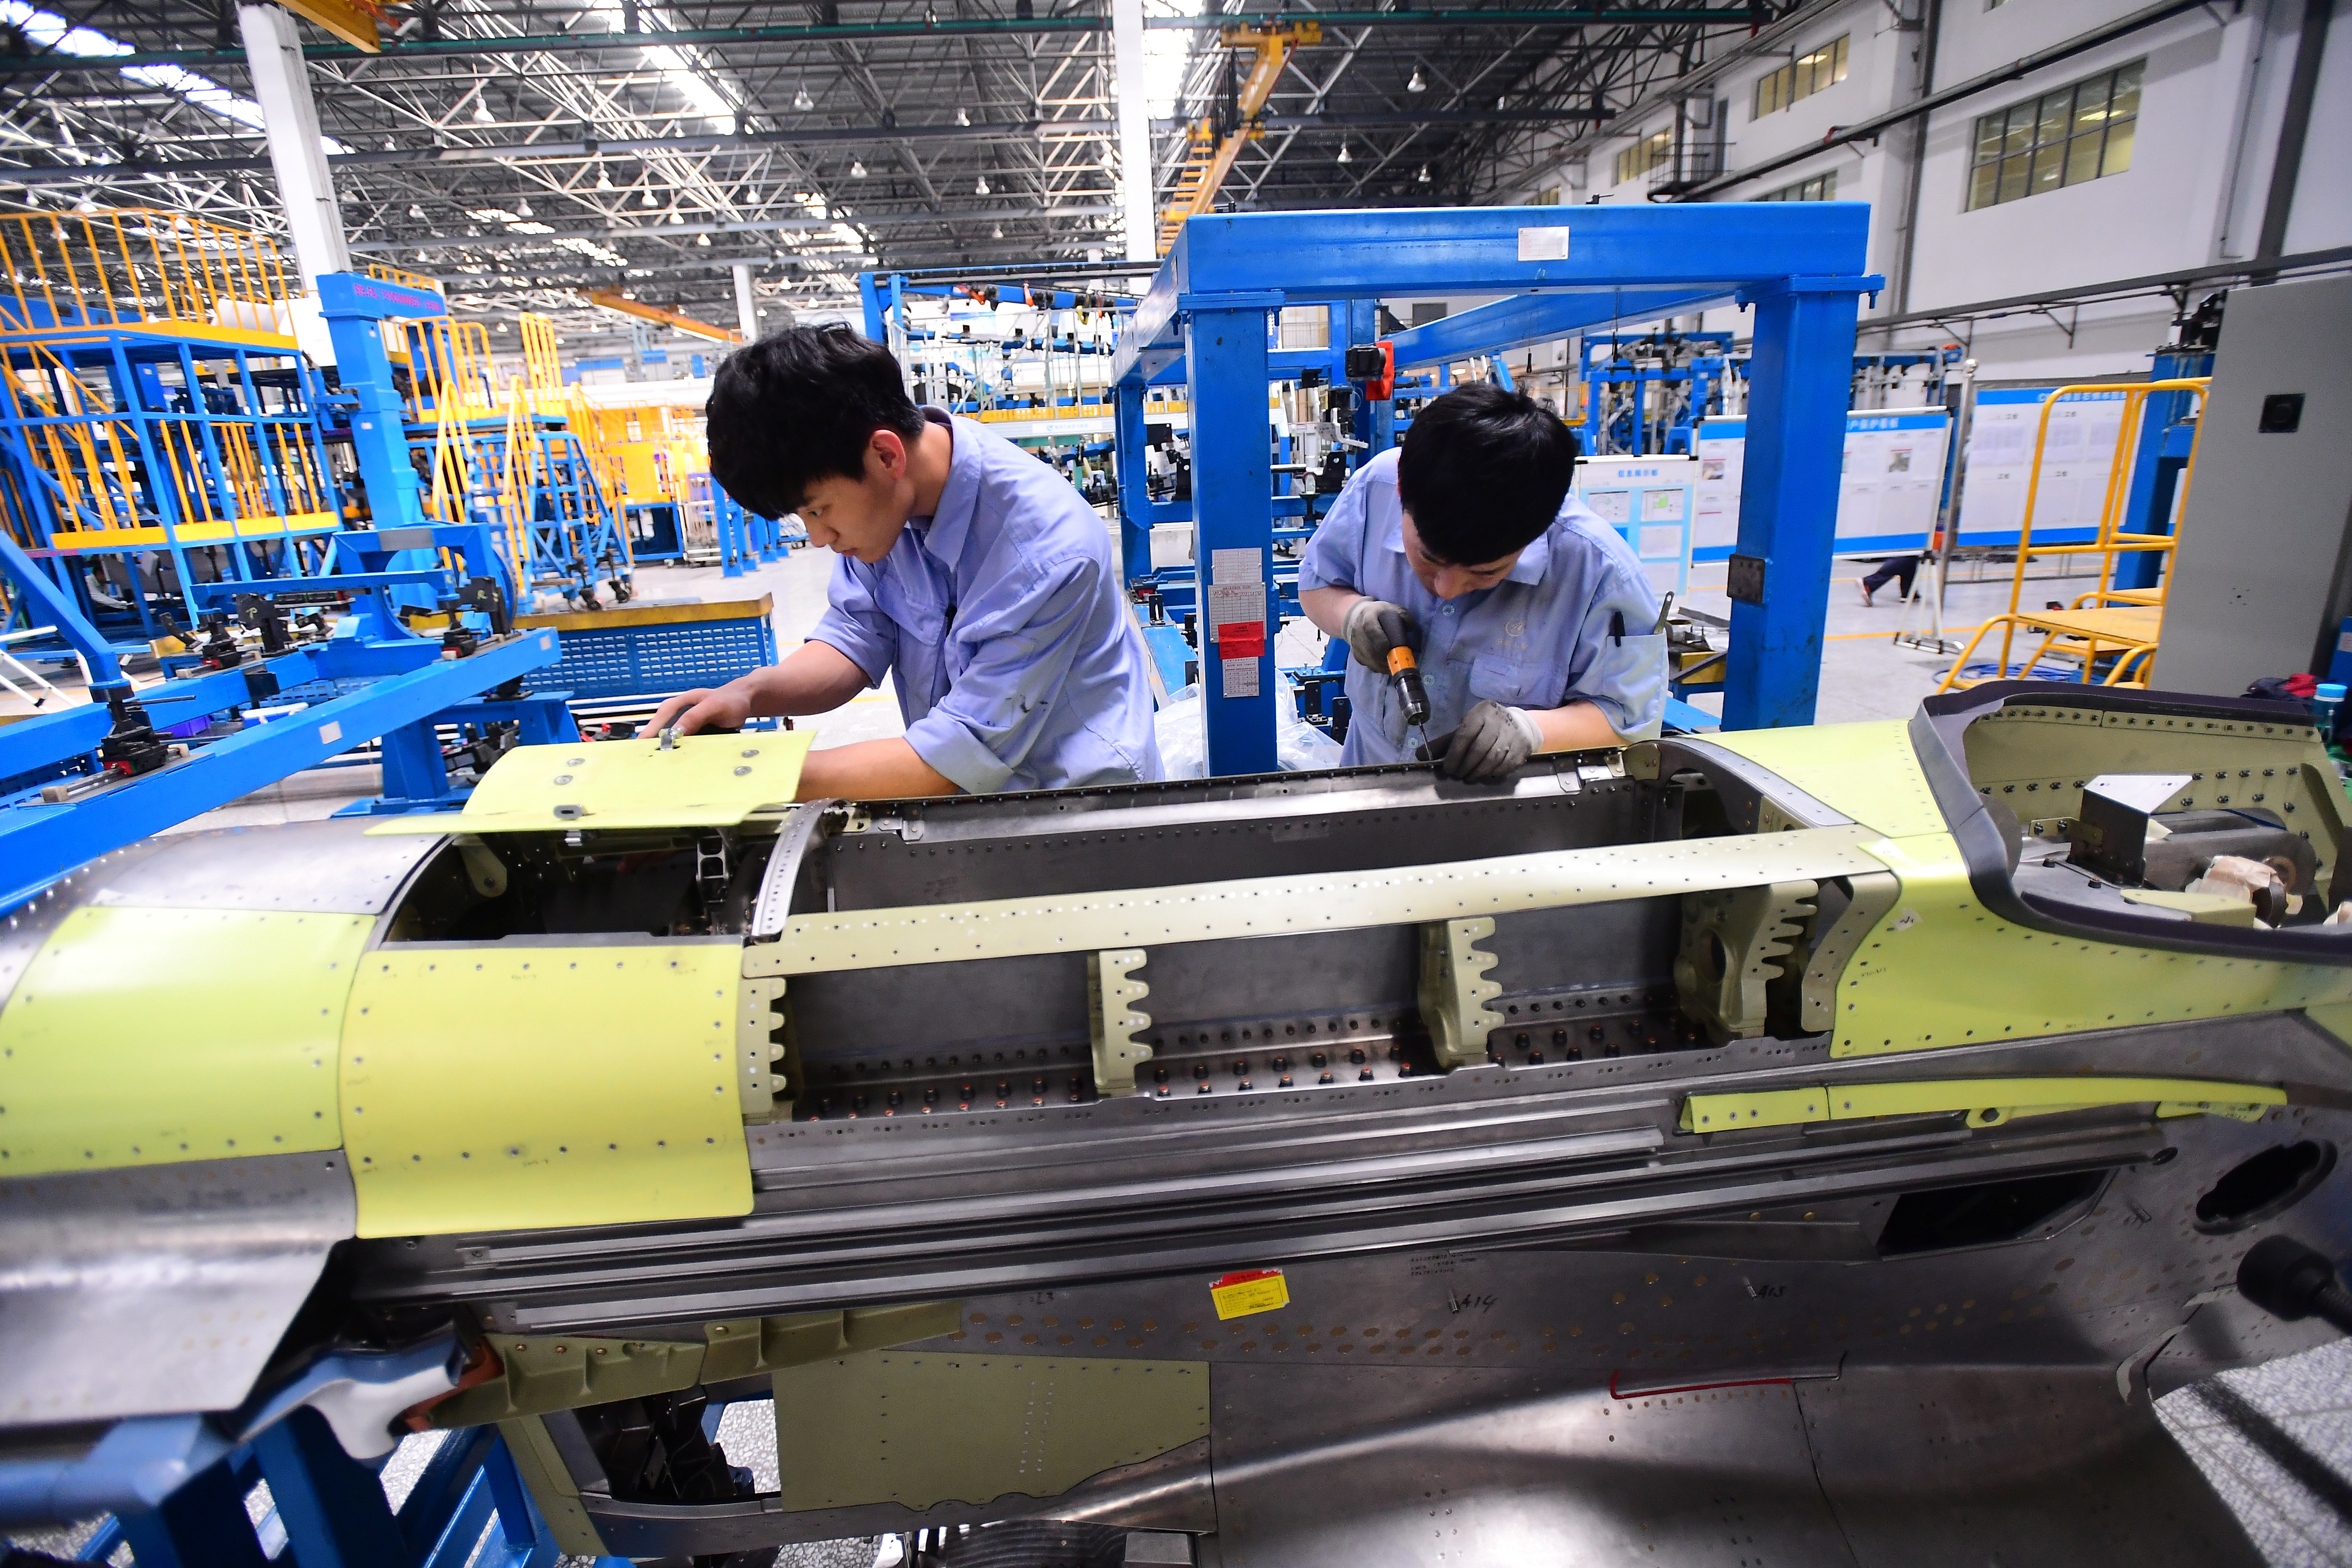 Workers assemble part of the engine assembly for China's self developed C919 passenger aircraft at a factory of Shenyang Aircraft Corporation in Shenyang